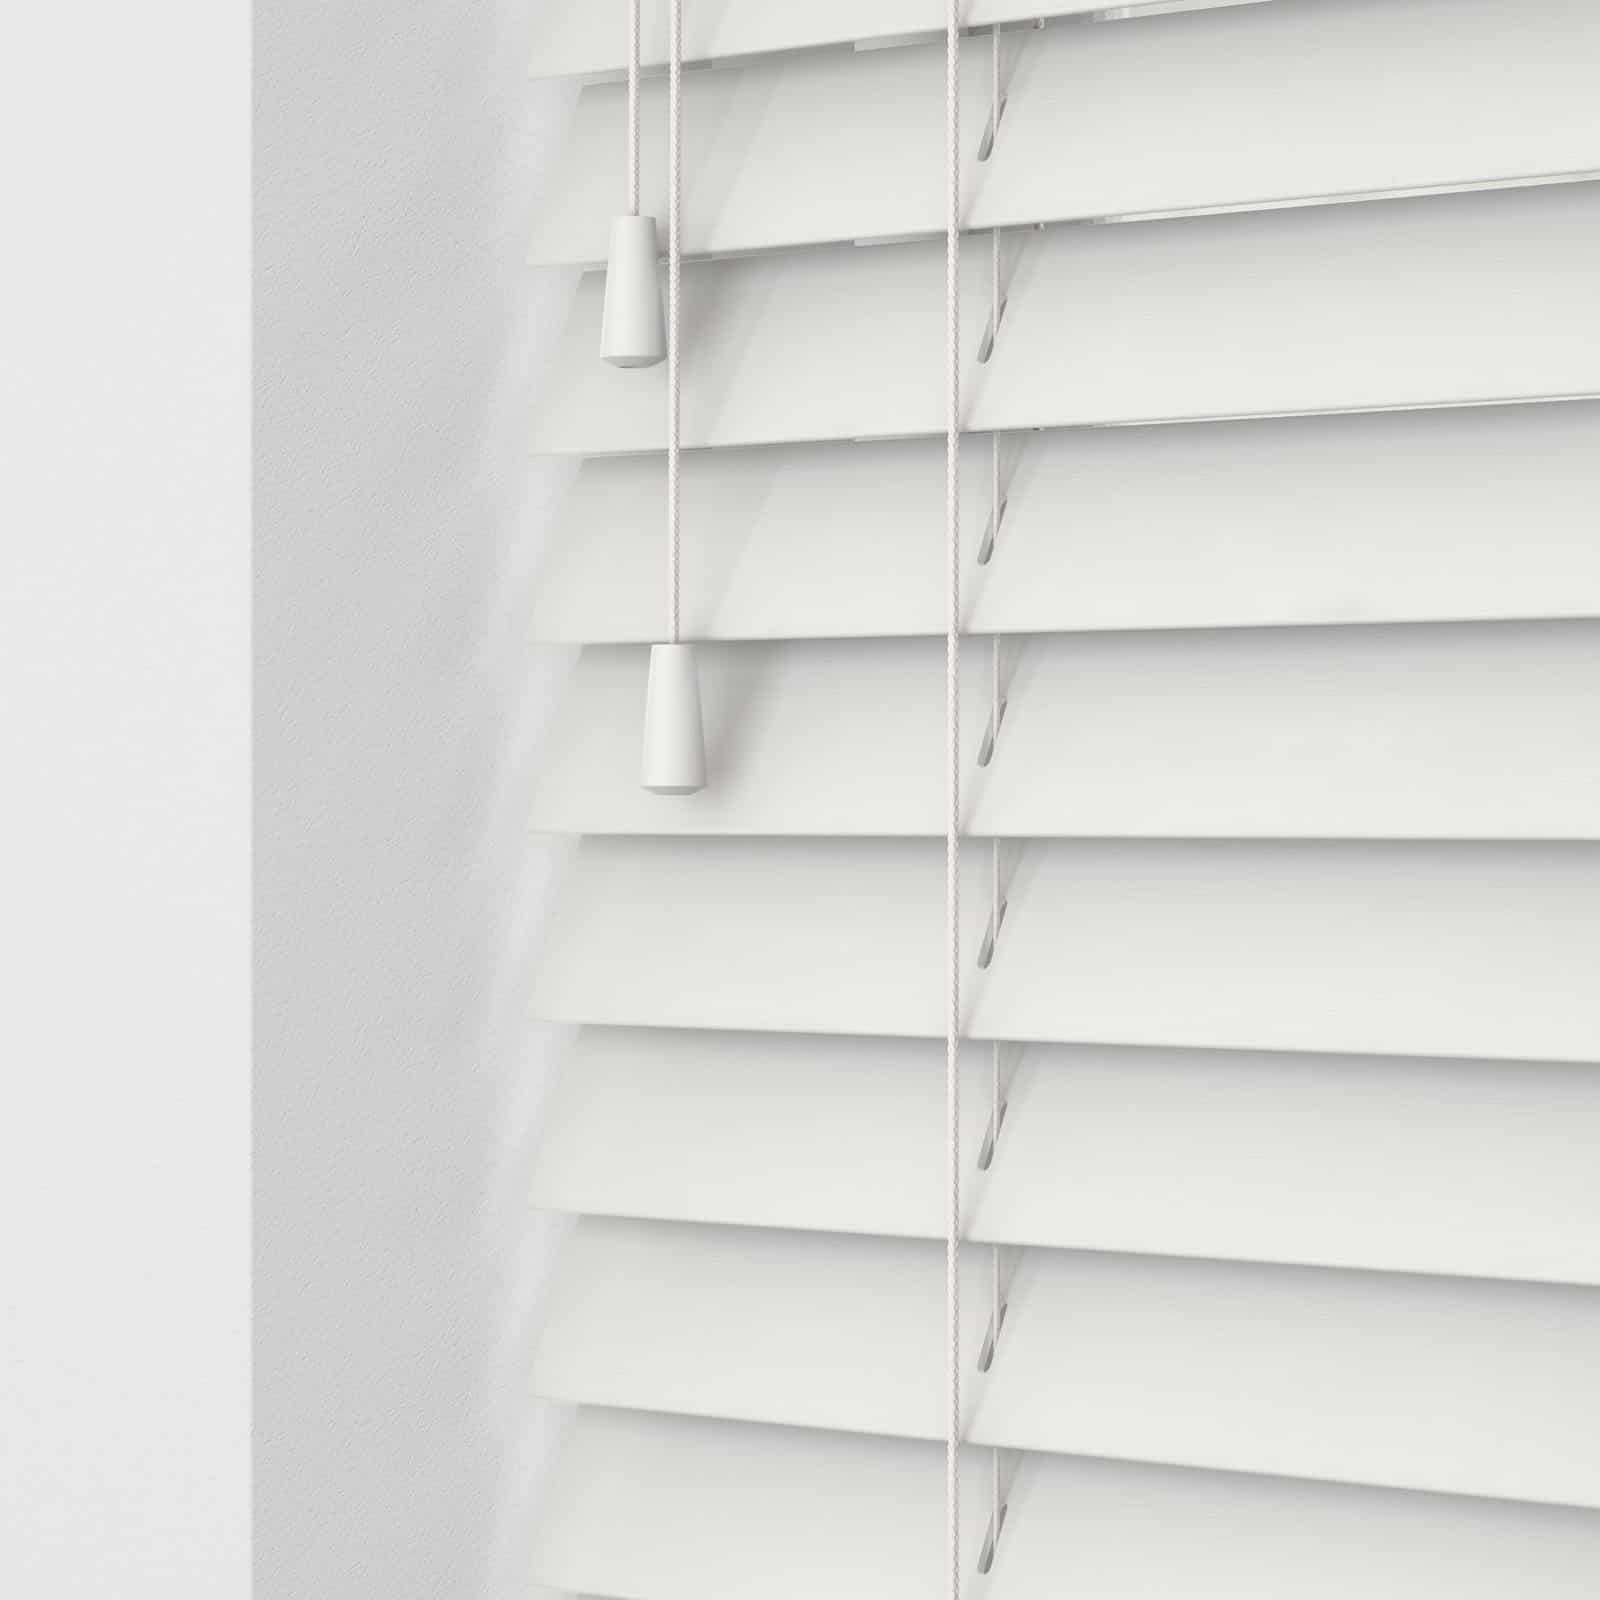 White, 60cm W x 150cm Drop, Tape Home in Style 4 U FAUX WOOD VENETIAN BLINDS 50MM SLATS TRIMMABLE EASY FIT 